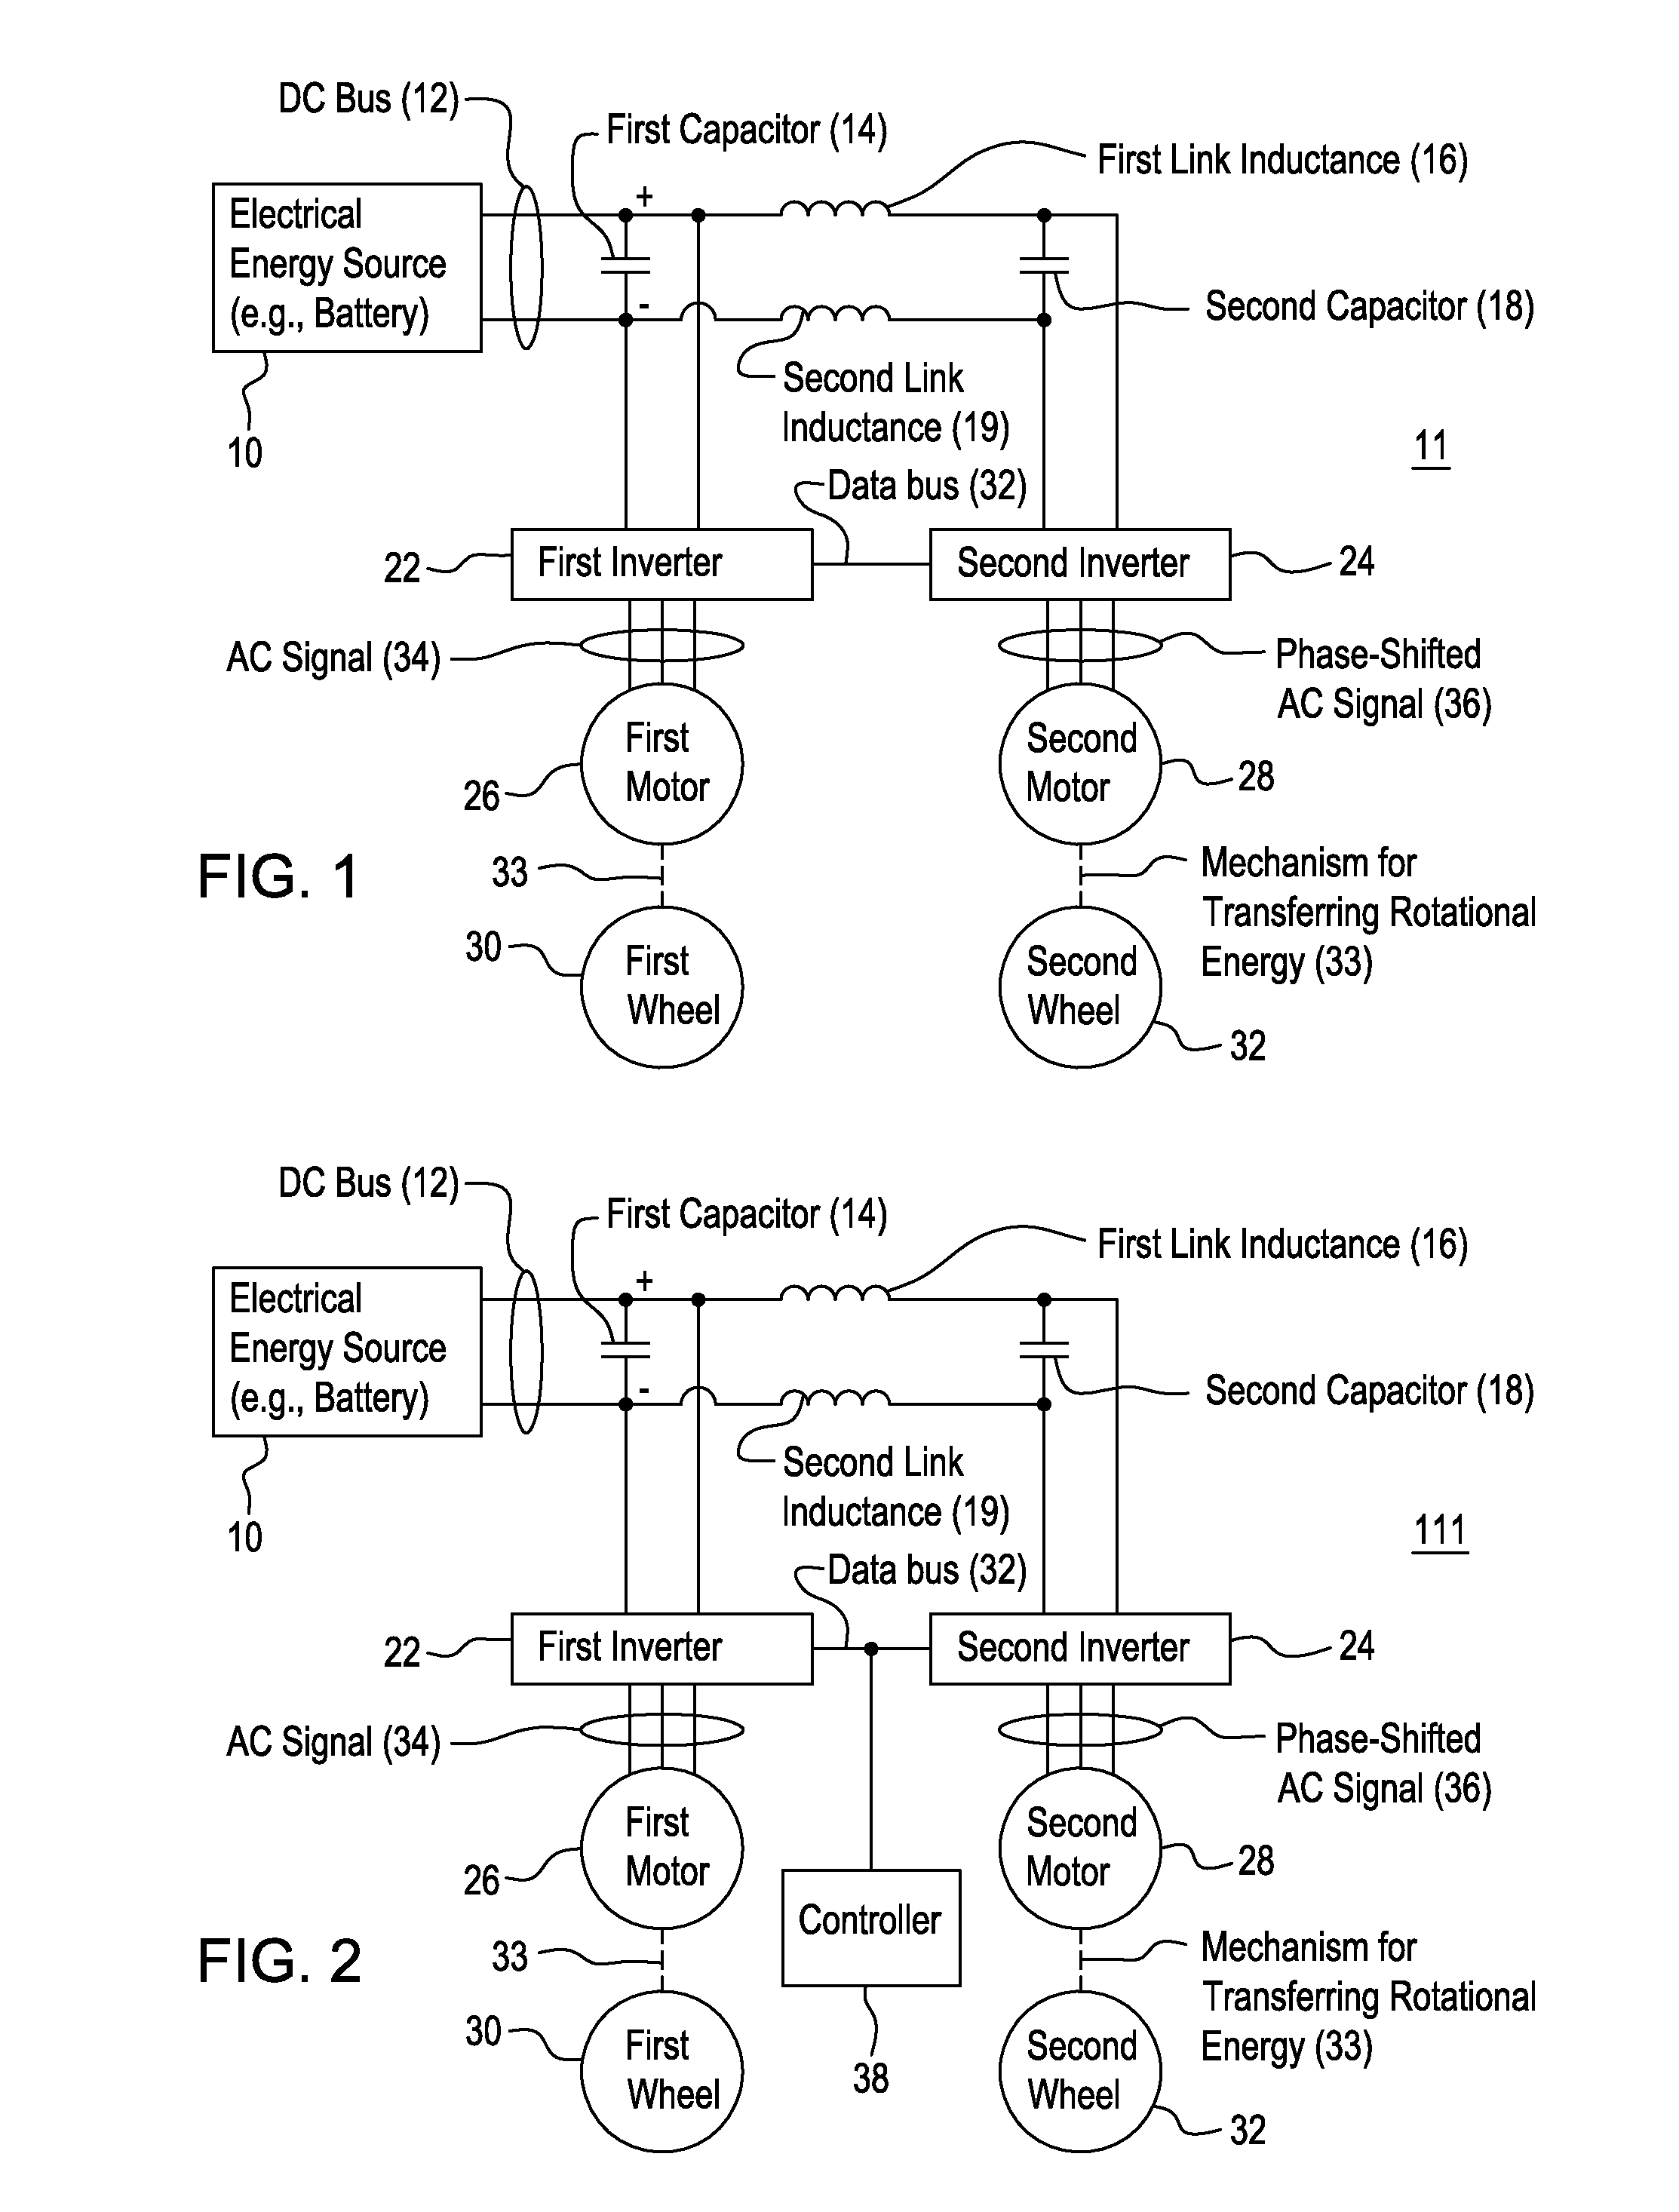 System for controlling rotary electric machines to reduce current ripple on a direct current bus